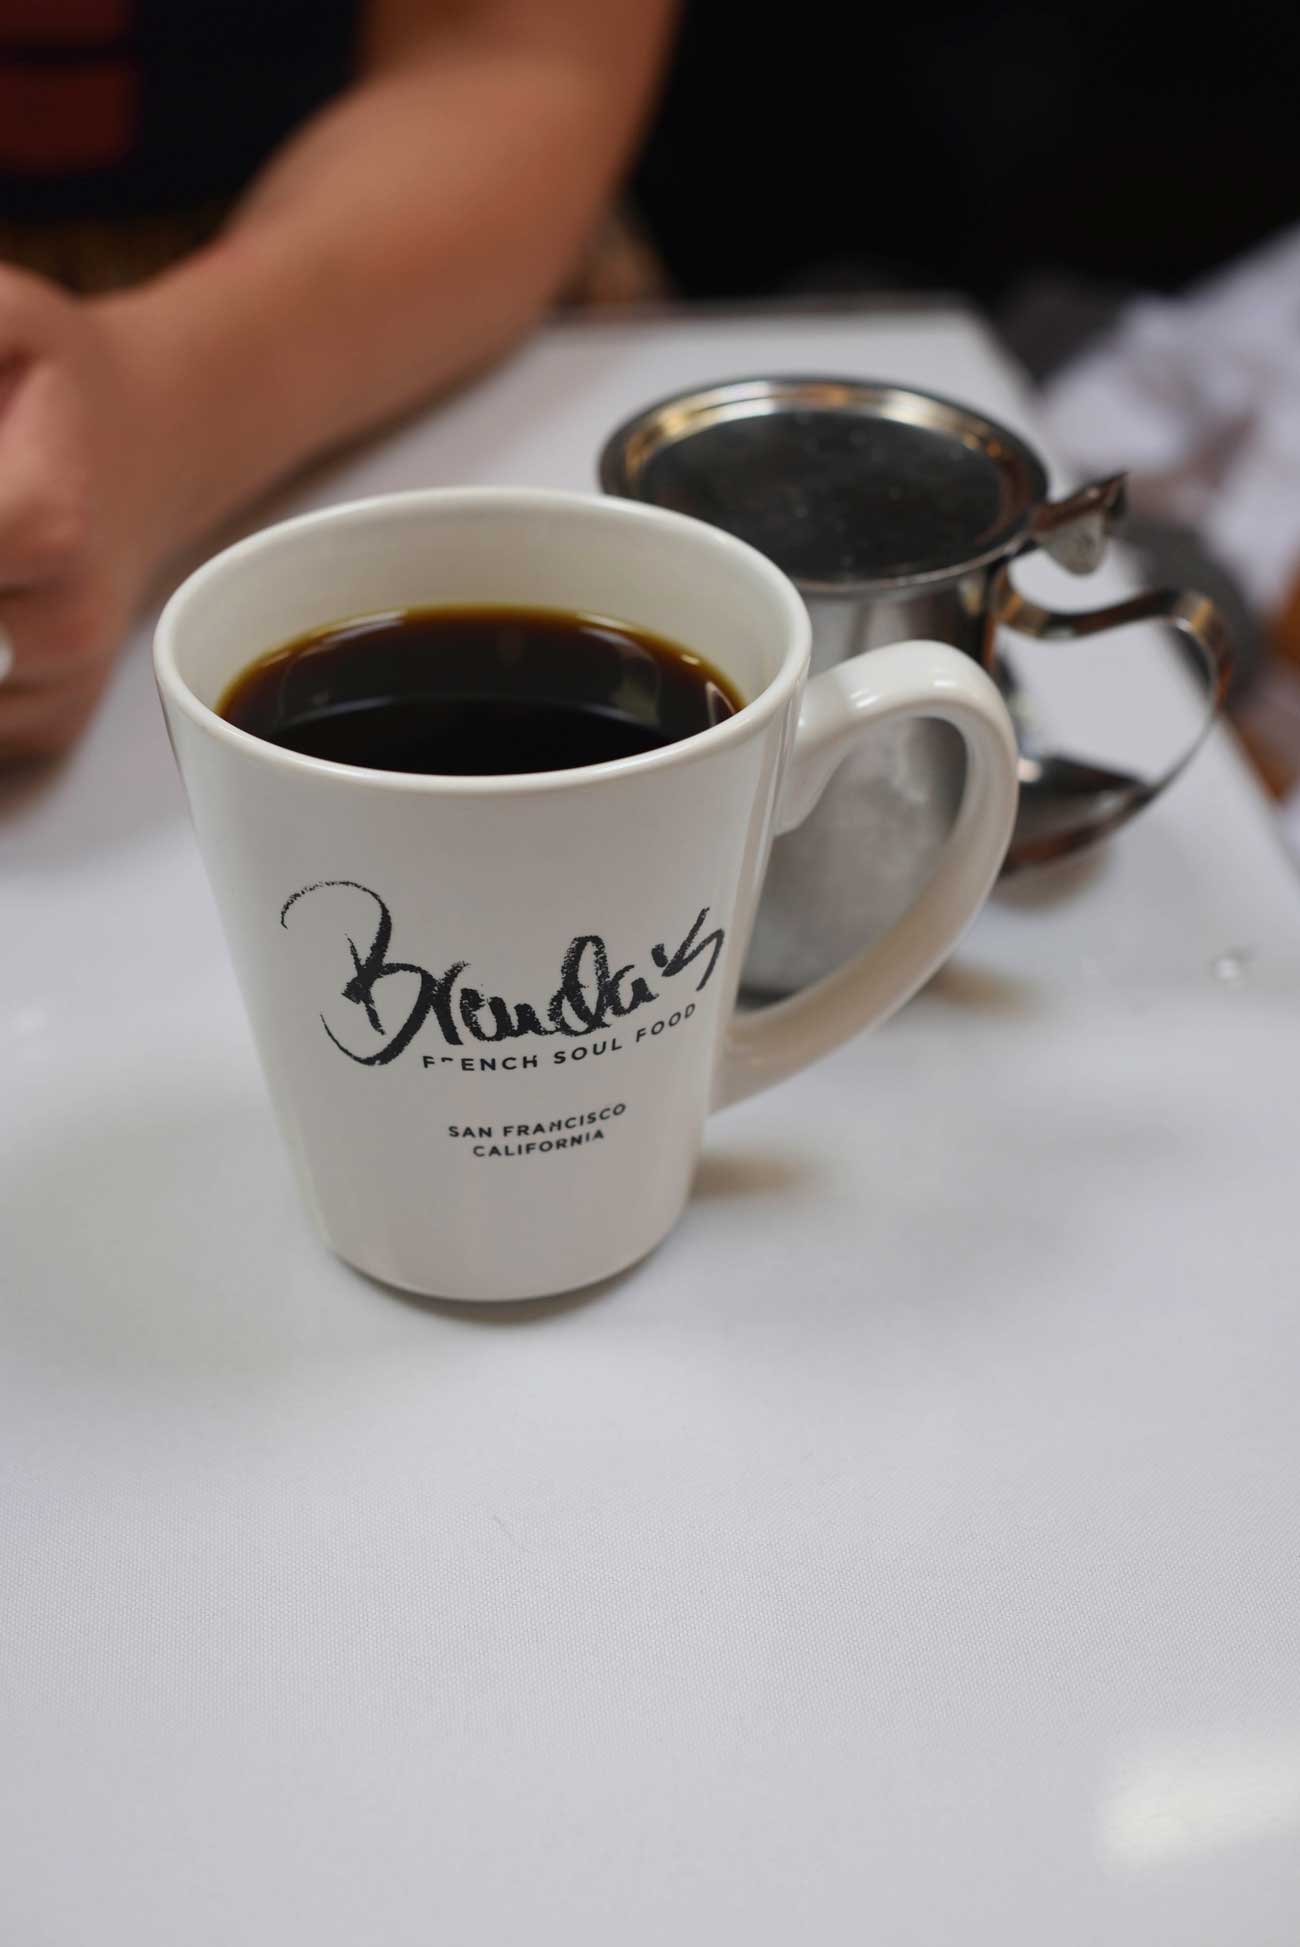 The coffee at Brenda's is made with chickory, New Orleans style